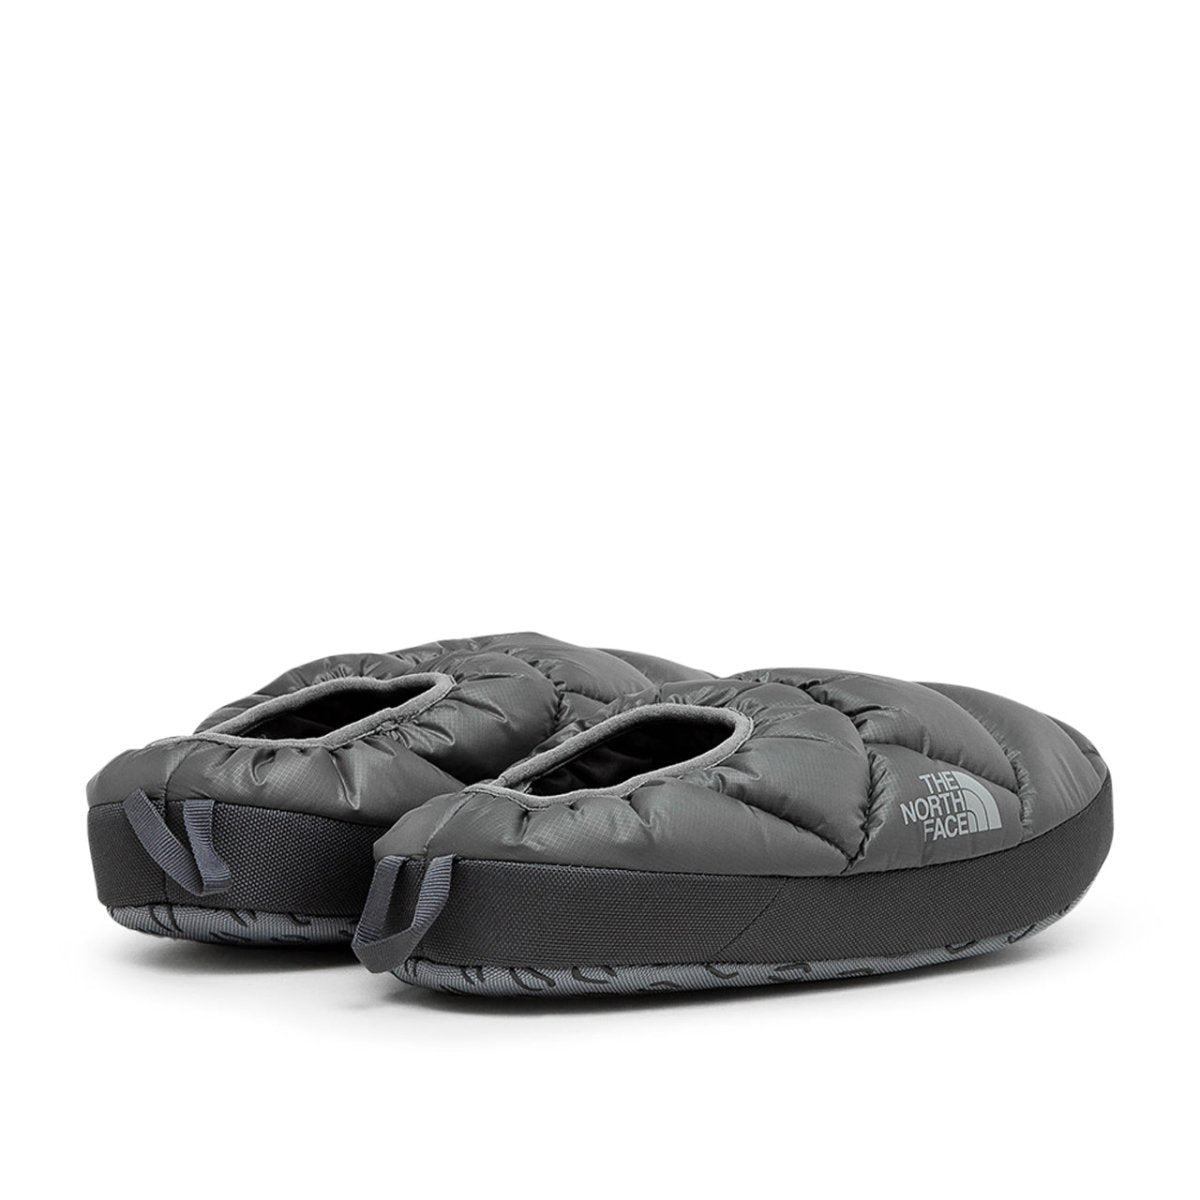 The North Face M NSE Tent Mule III Shoes (Grau)  - Allike Store